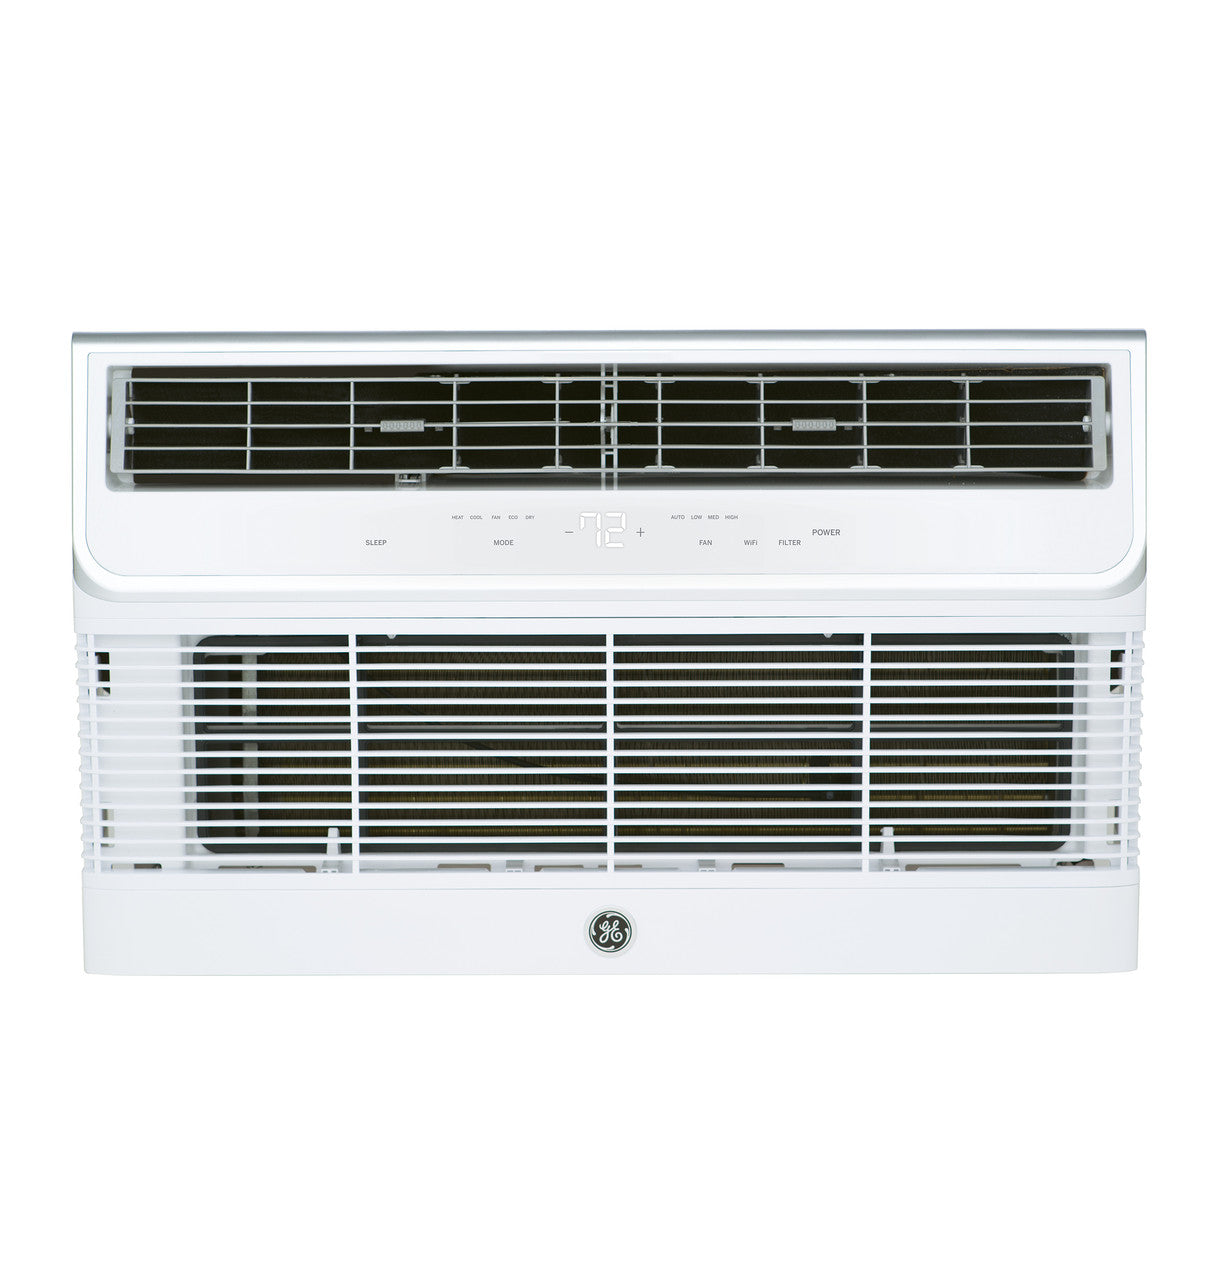 GE 14,000 BTU 208/230 Volt Through-the-Wall Air Conditioner: Cooling Only - AJCQ14DWJ